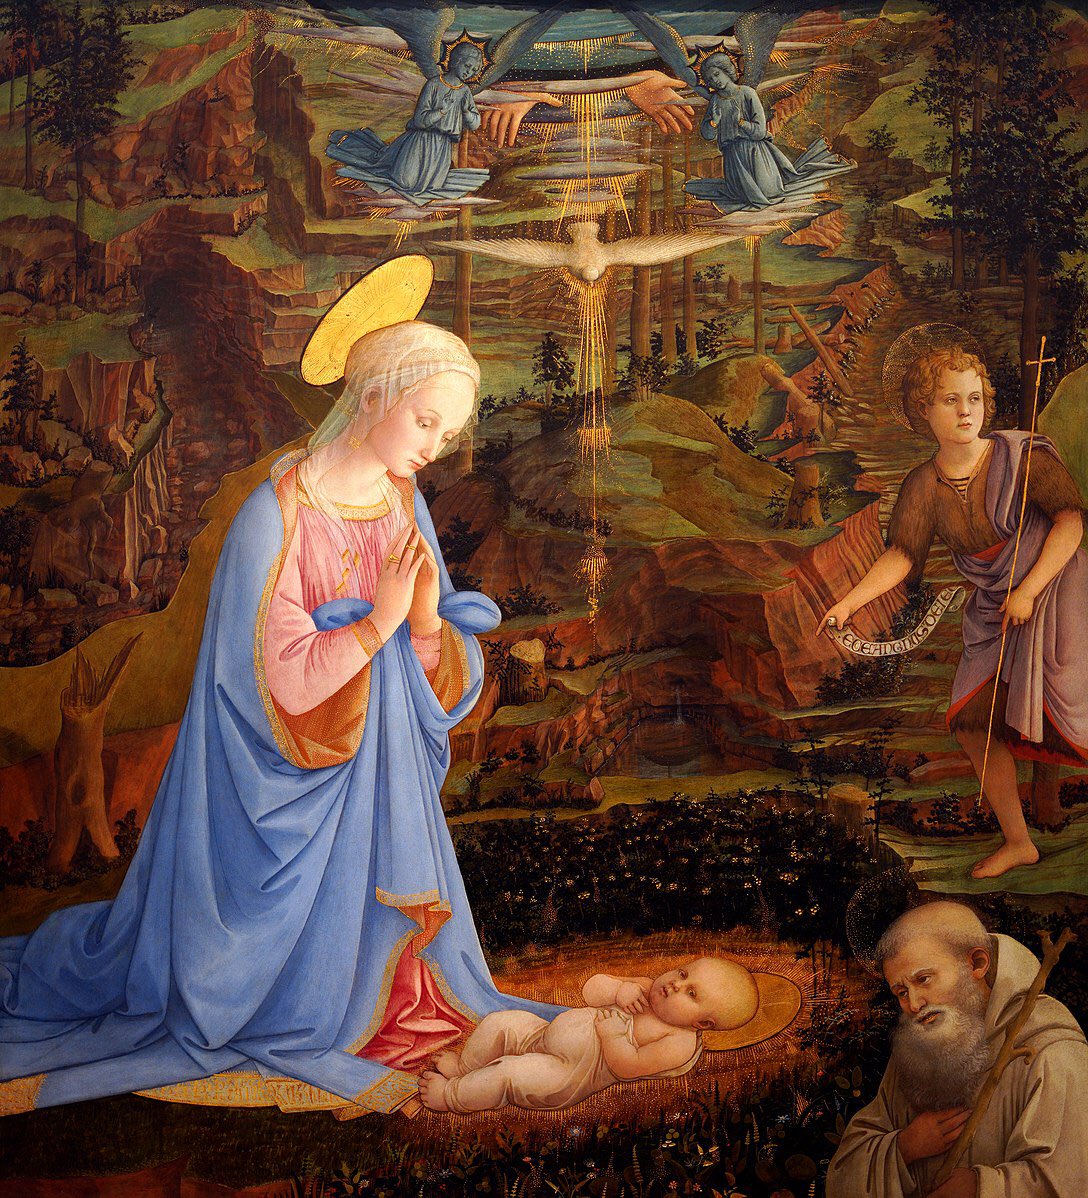 Art:
Adoration Of The Christ Child With The Young Saint John The Baptist, SAINT ROMUALD, Angels,The Hands Of God The Father And The Holy Ghost As A Dove
By
Filippo Lippi,1406–1469
#StRomuald #SaintOfTheDay #PrayForUs #CatholicArt #FilippoLippi #ChristianArt #ReligiousArt #KalinaB